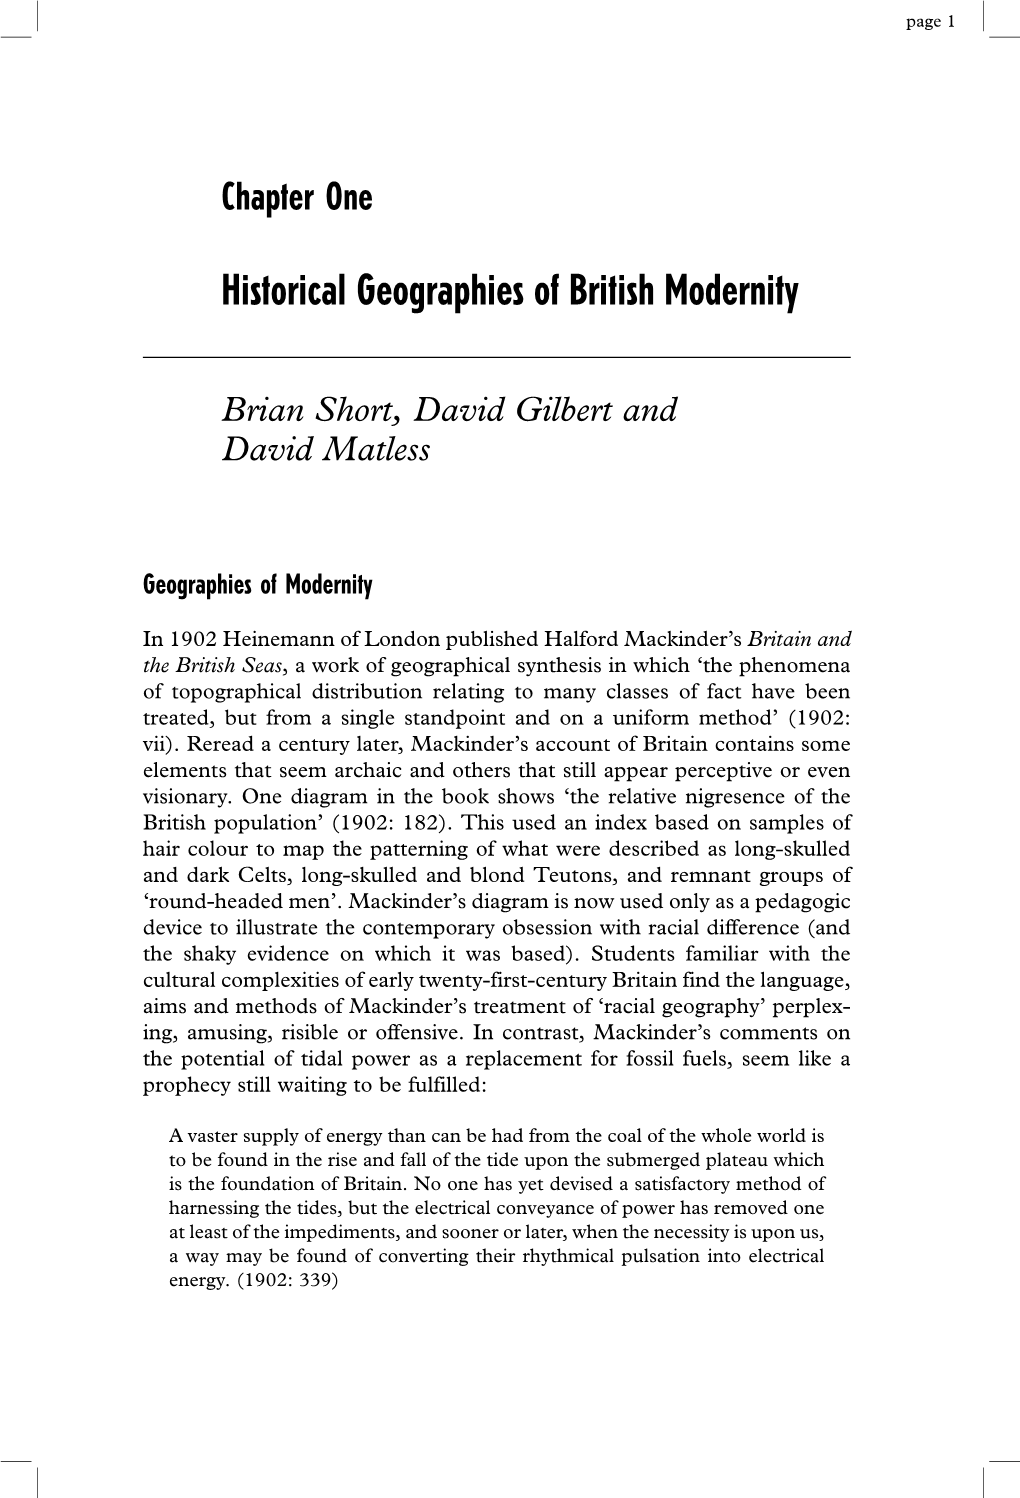 Historical Geographies of British Modernity